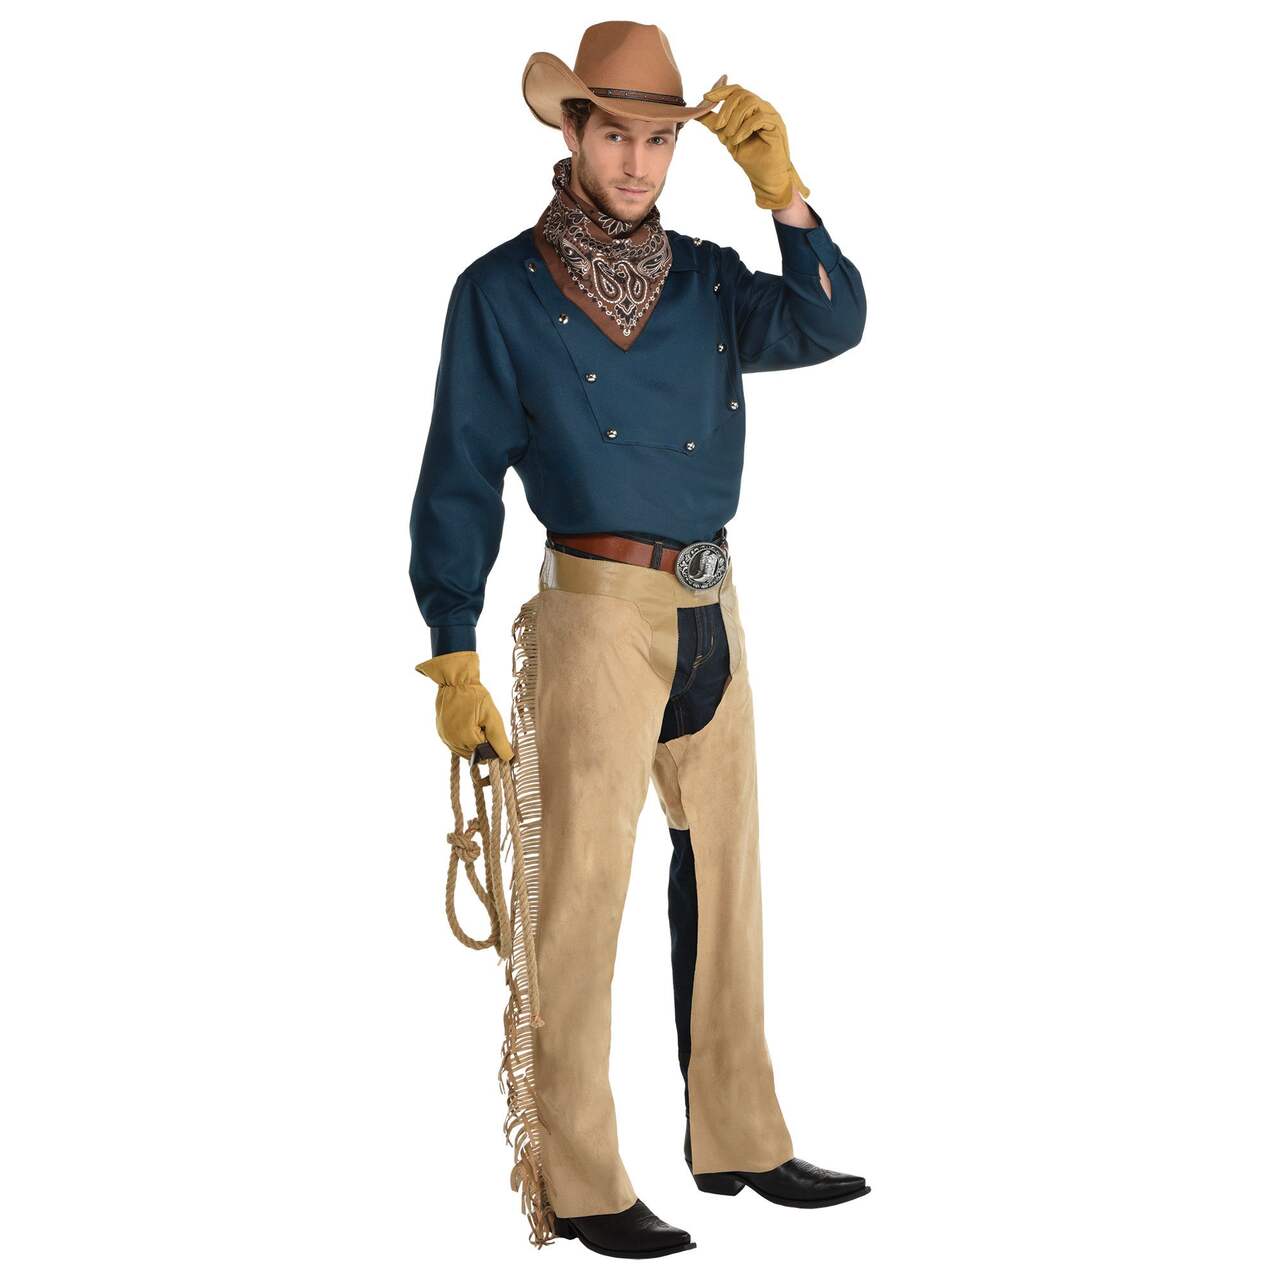 https://media-www.canadiantire.ca/product/seasonal-gardening/party-city-seasonal/party-city-halloween-and-fall-decor/8549771/cowboy-chaps-149dd22e-3097-4a04-84db-c4d5273f6cd5-jpgrendition.jpg?imdensity=1&imwidth=640&impolicy=mZoom